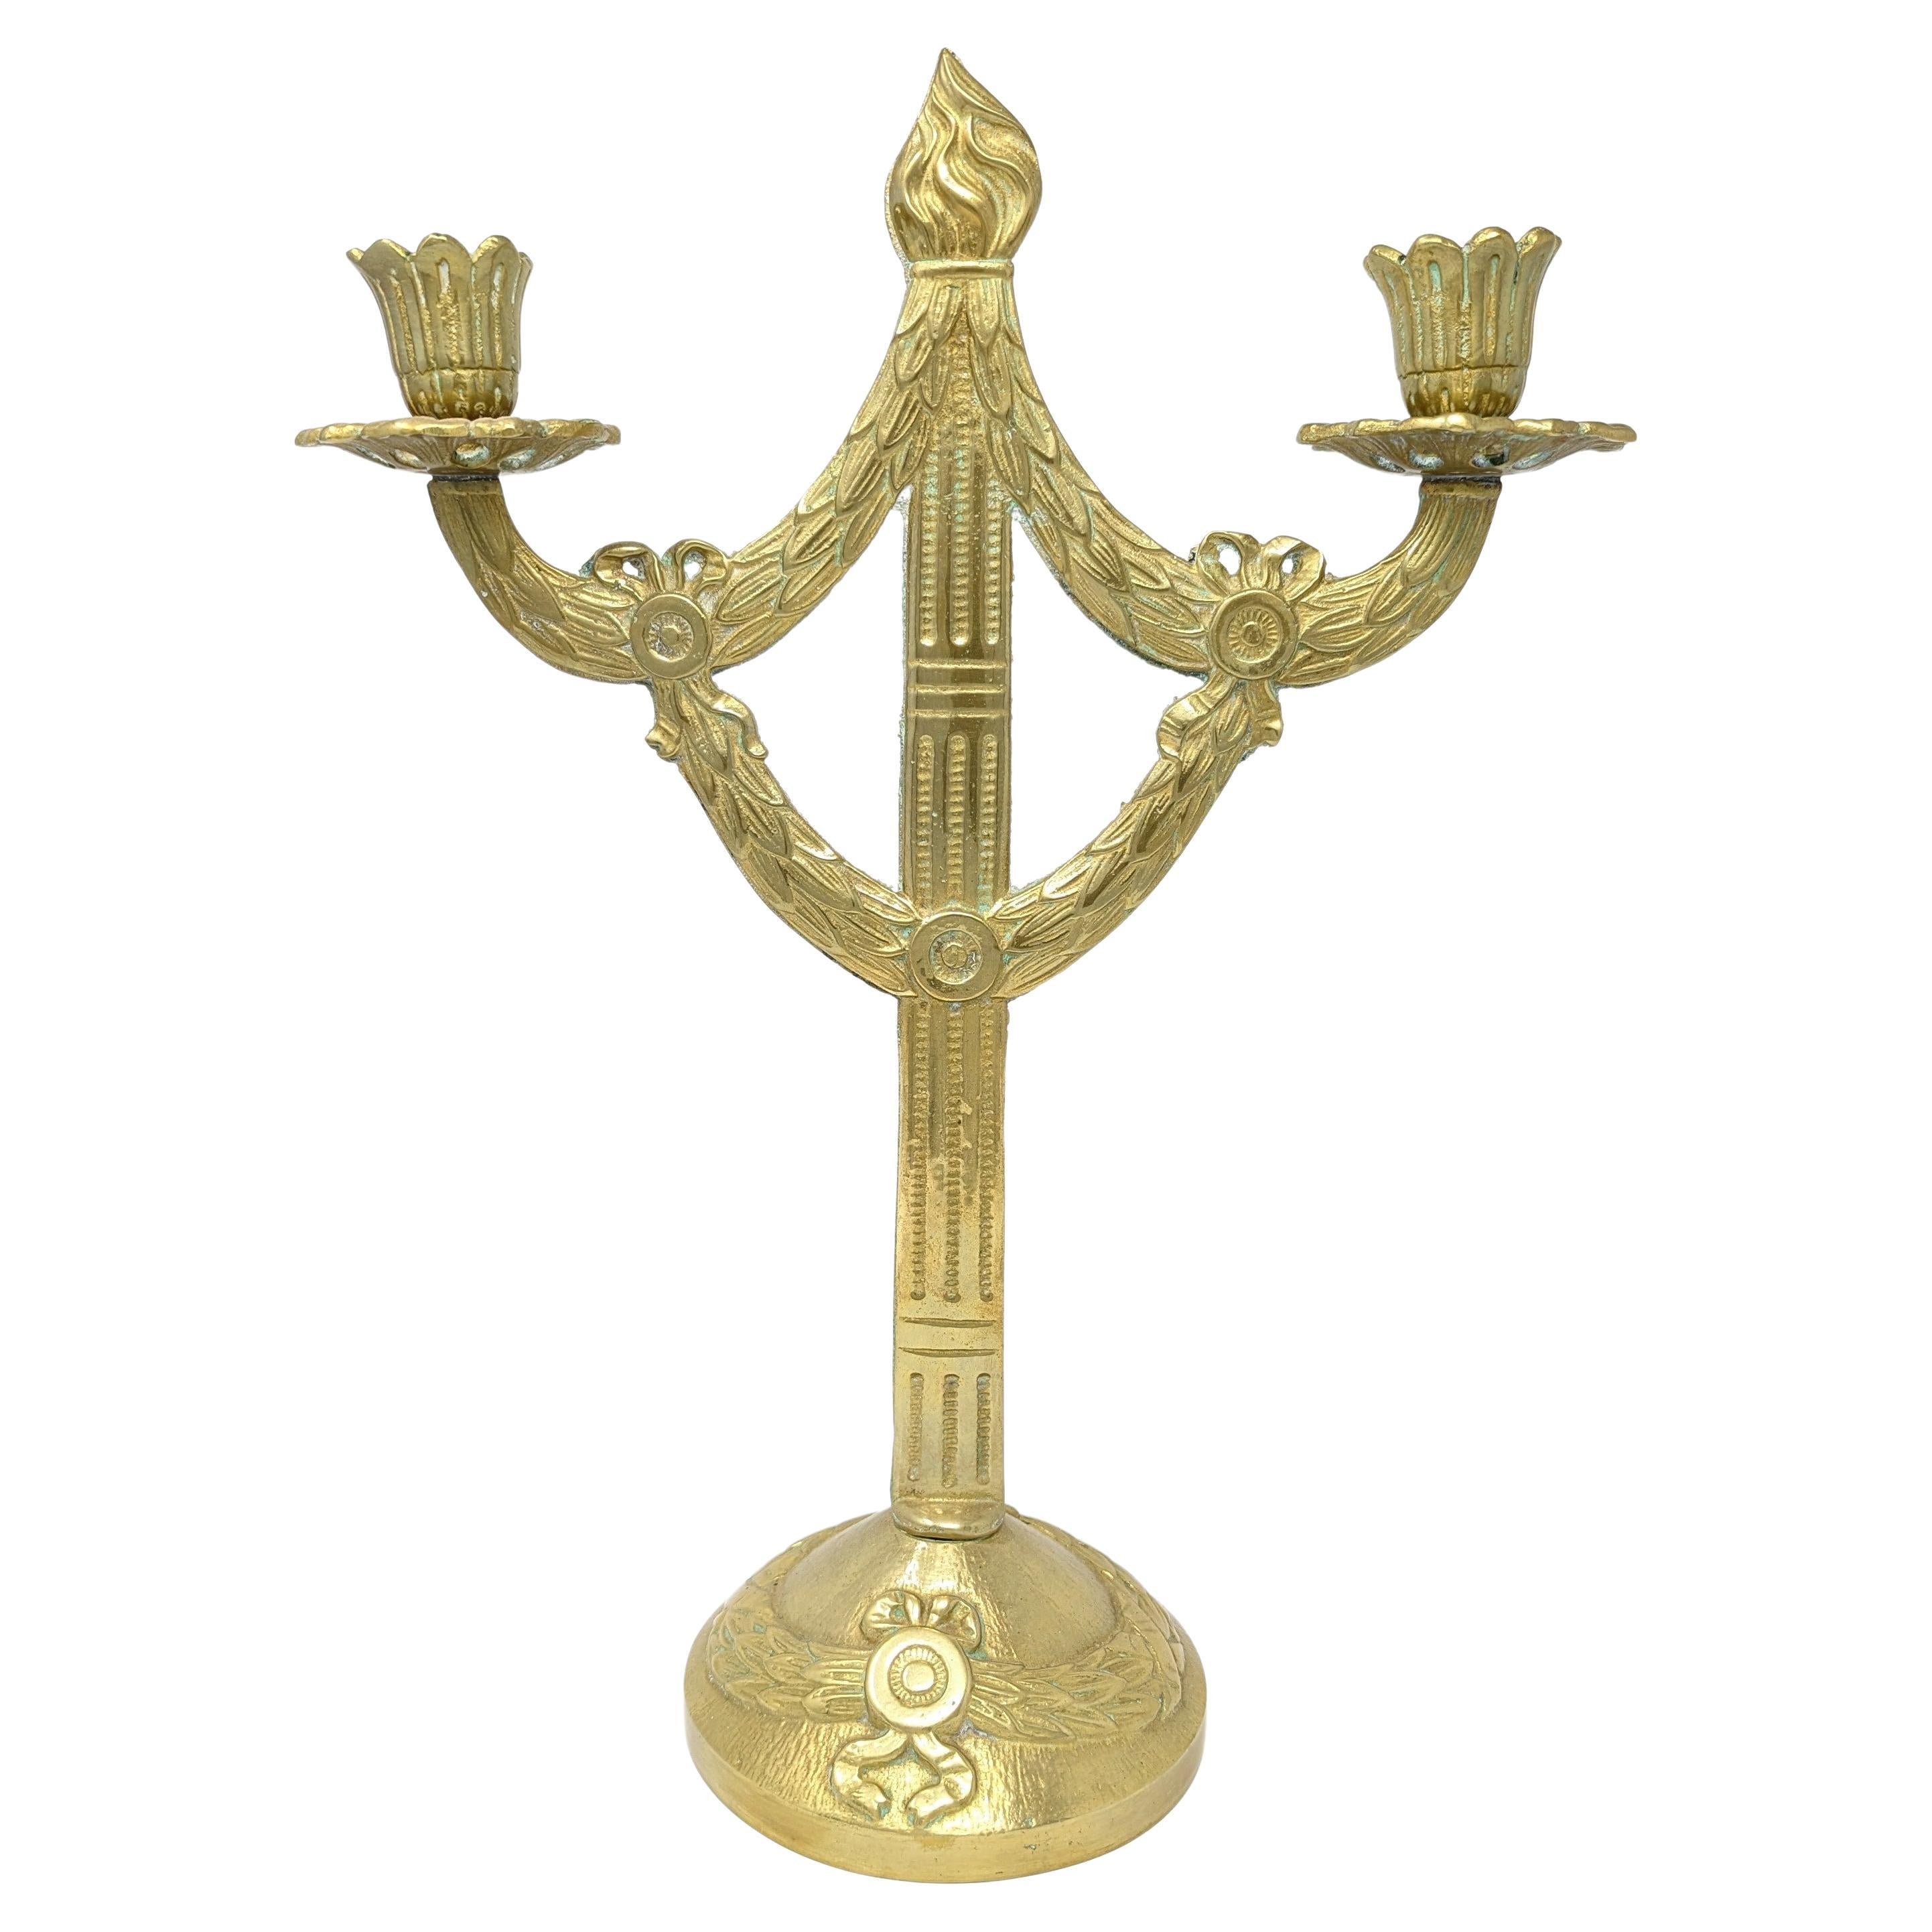 Antique Brass Candelabra Two Arm Candlestick w/ Classical Ribbon & Wreath Design For Sale